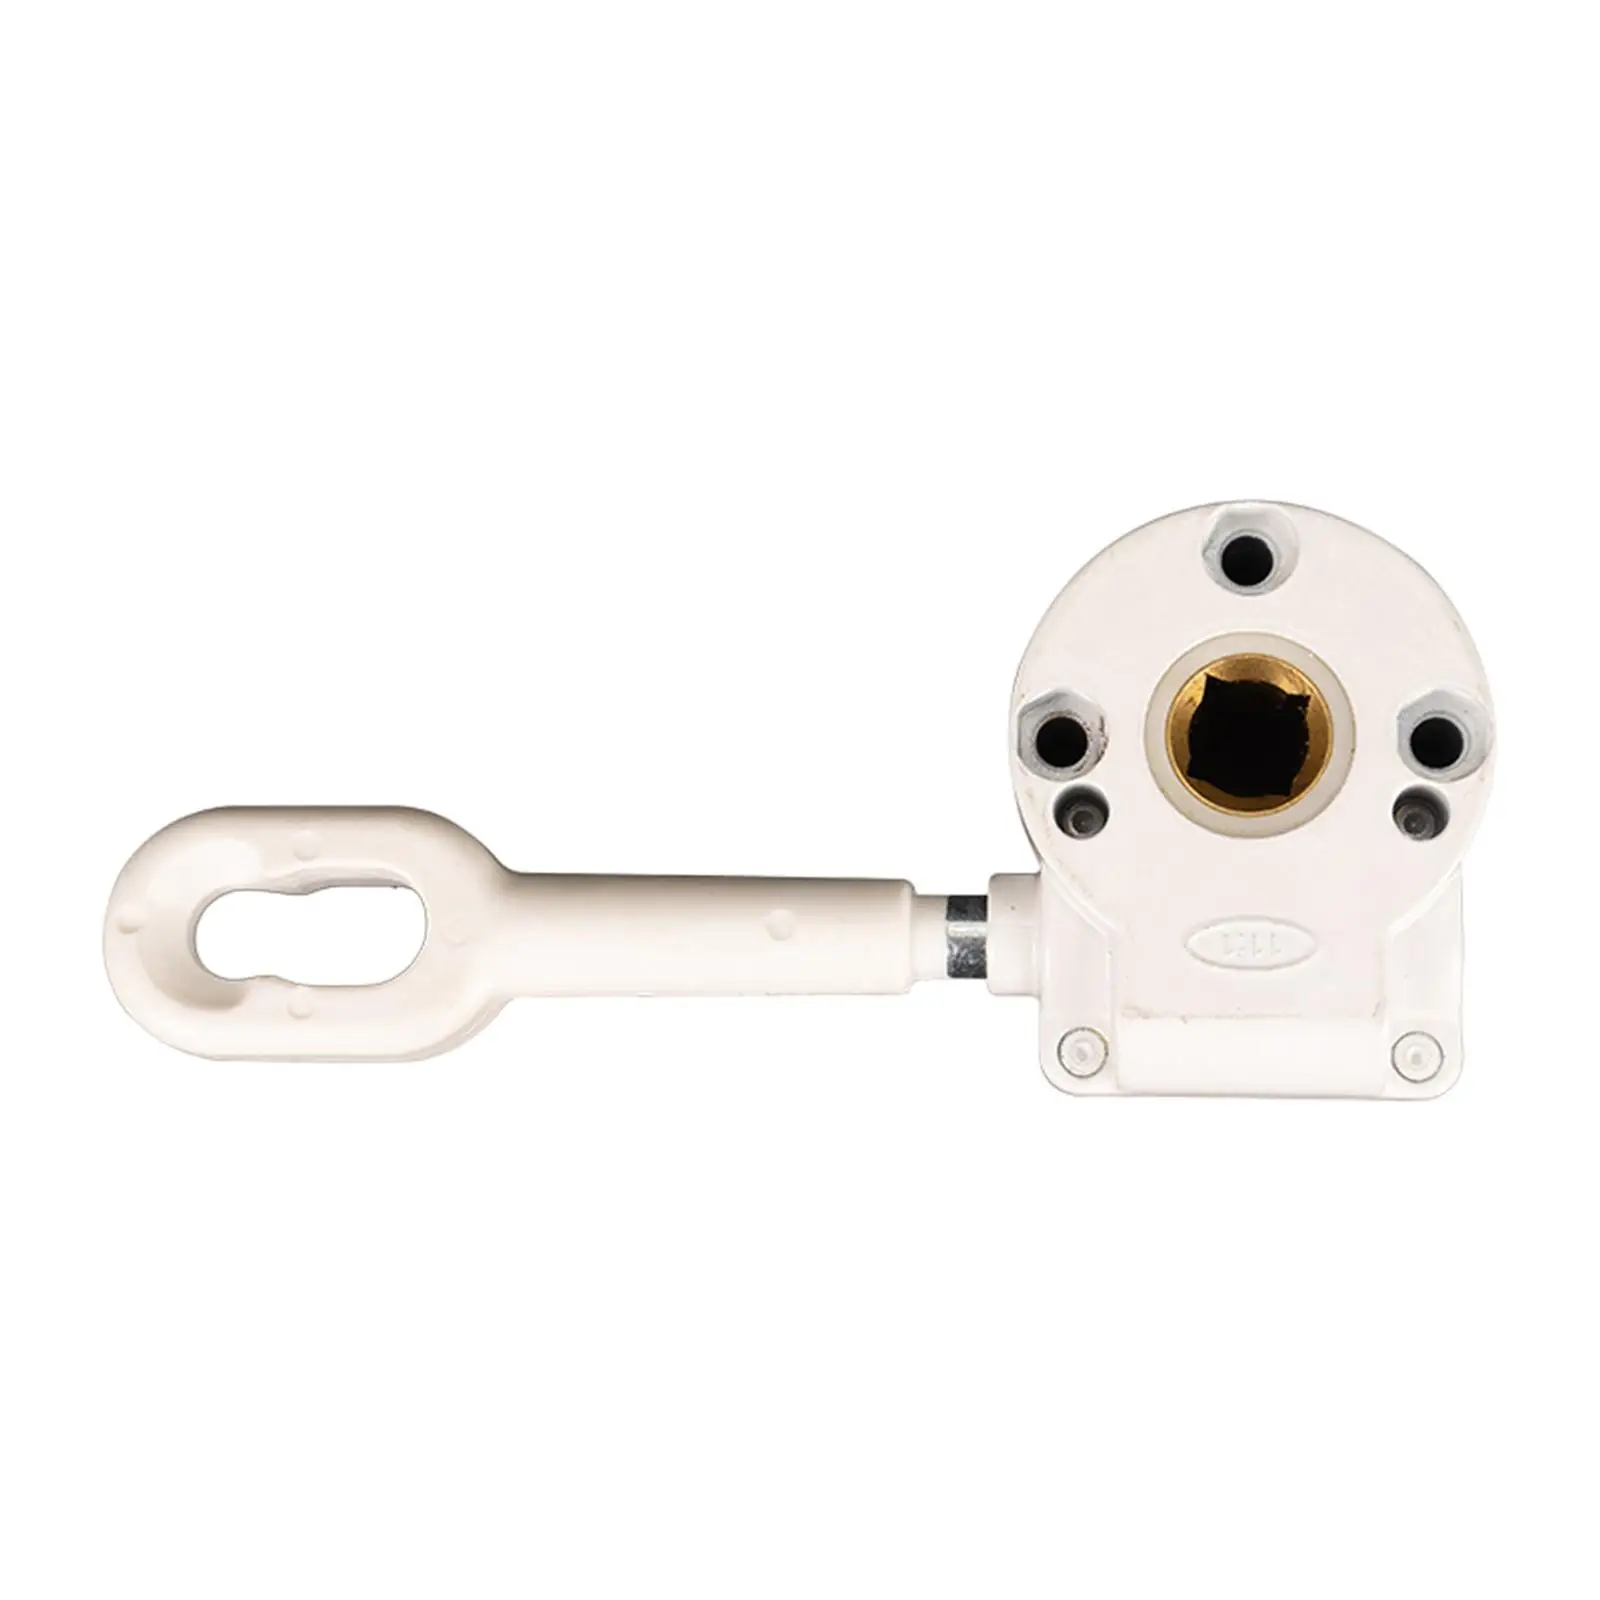 Awning Manual Worm Gear Durable 360 Degree Rotating Easily Mounted Professional Aluminium Alloy Accessories Hardware Parts